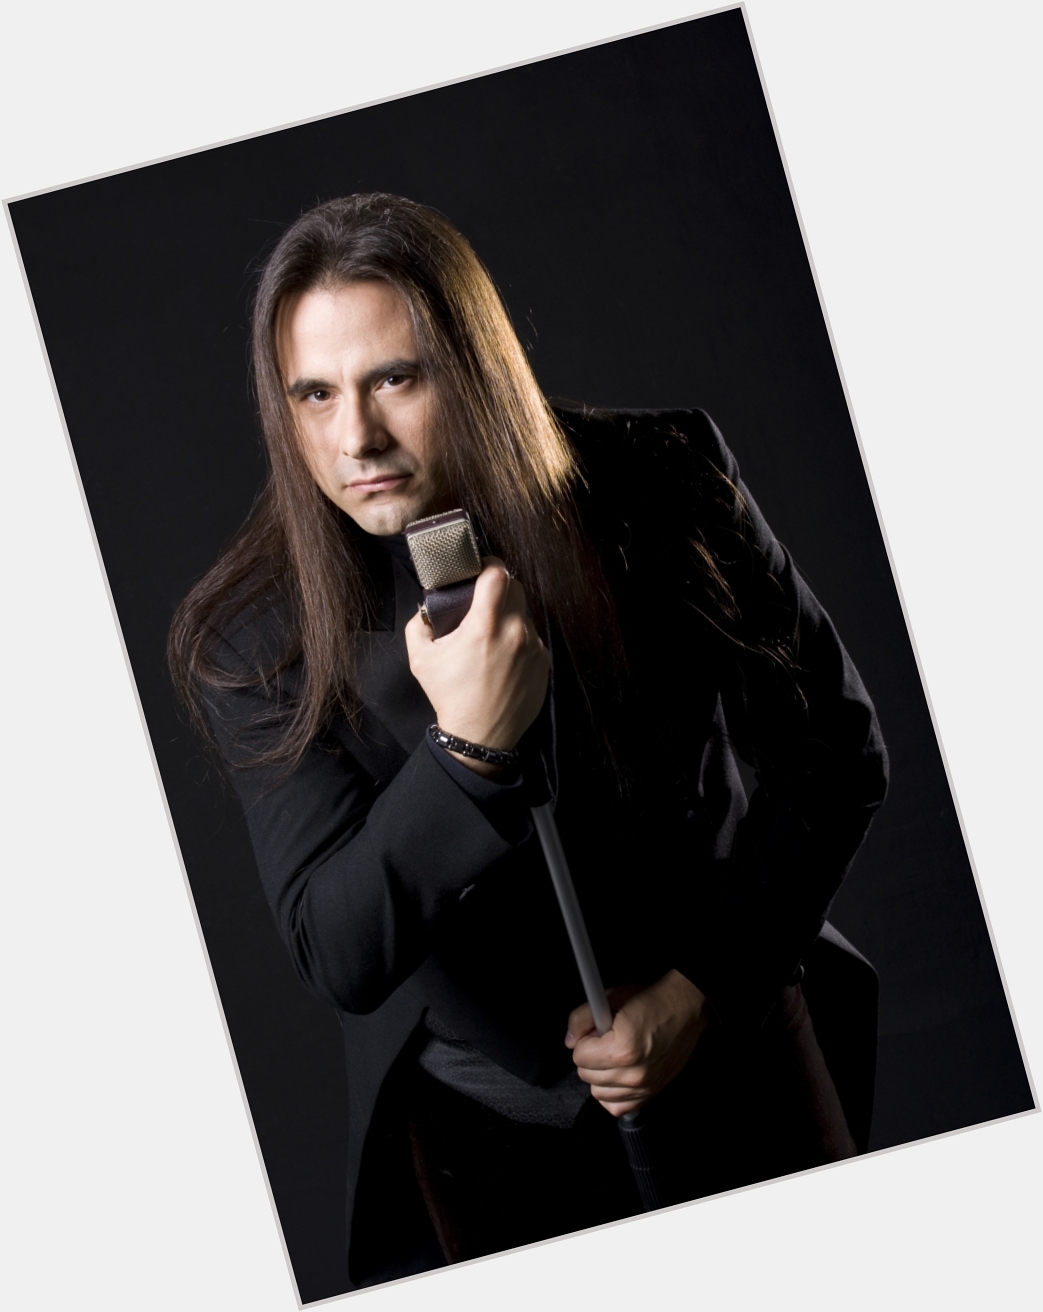 Https://fanpagepress.net/m/A/Andre Matos New Pic 0